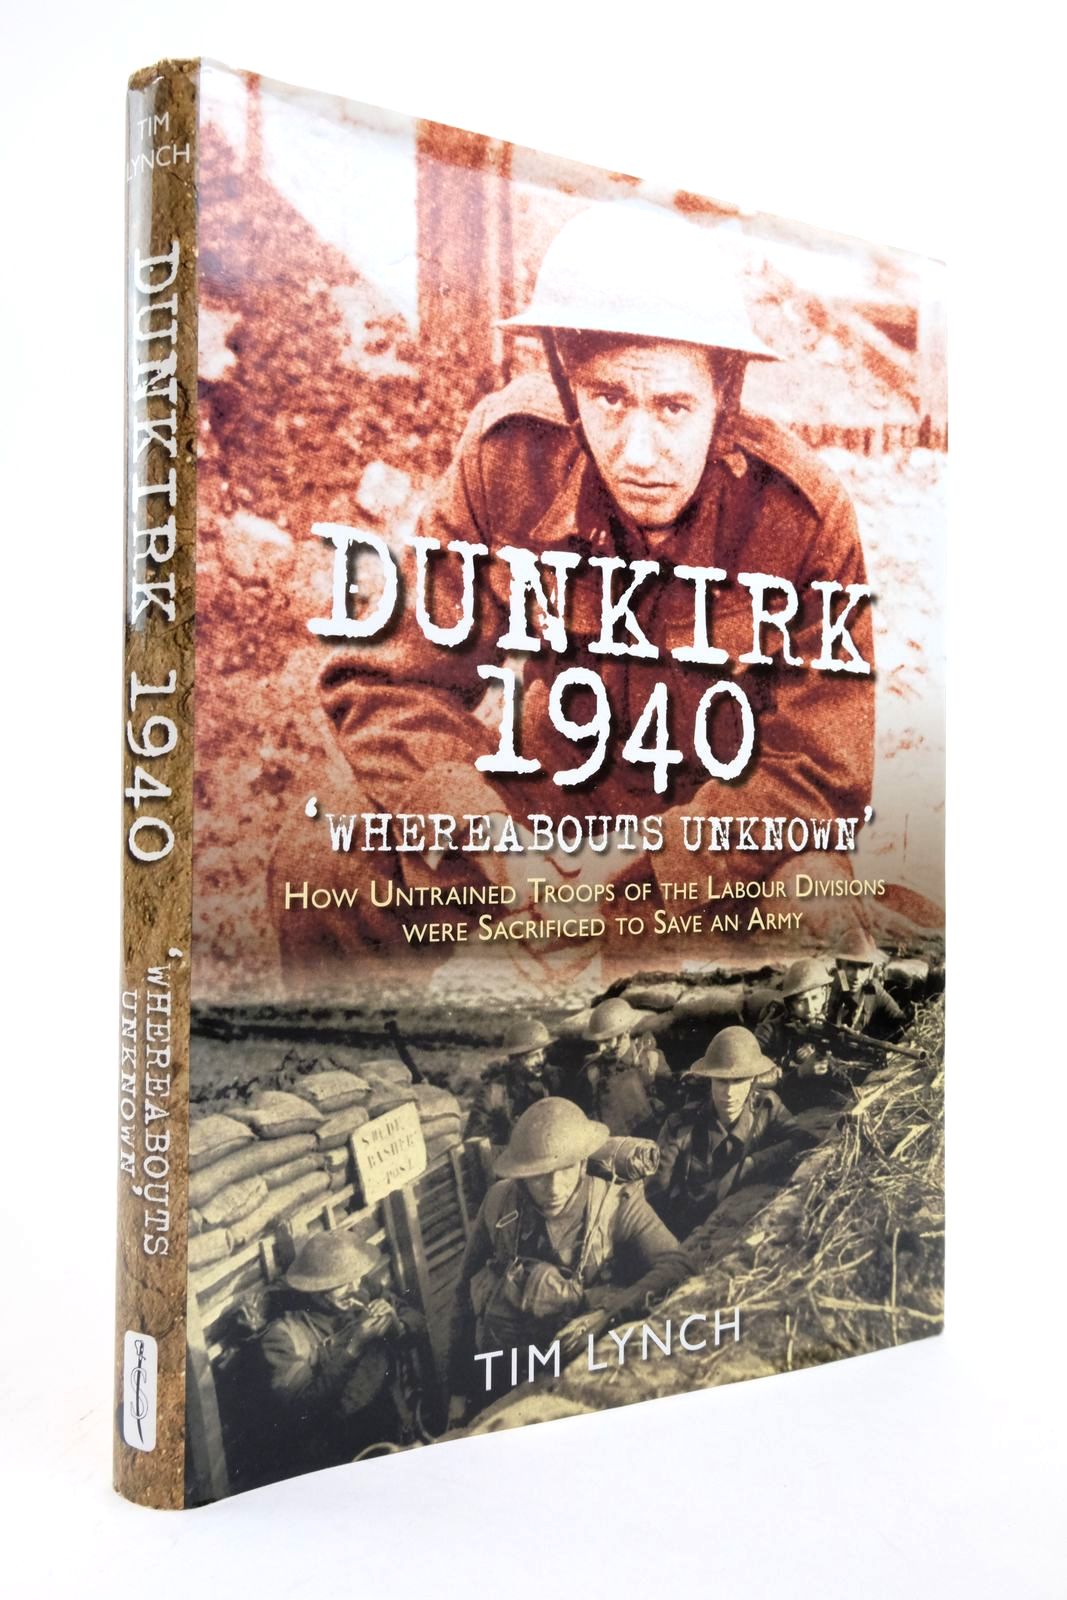 Photo of DUNKIRK 1940 'WHEREABOUTS UNKNOWN' written by Lynch, Tim published by Spellmount (STOCK CODE: 2138550)  for sale by Stella & Rose's Books